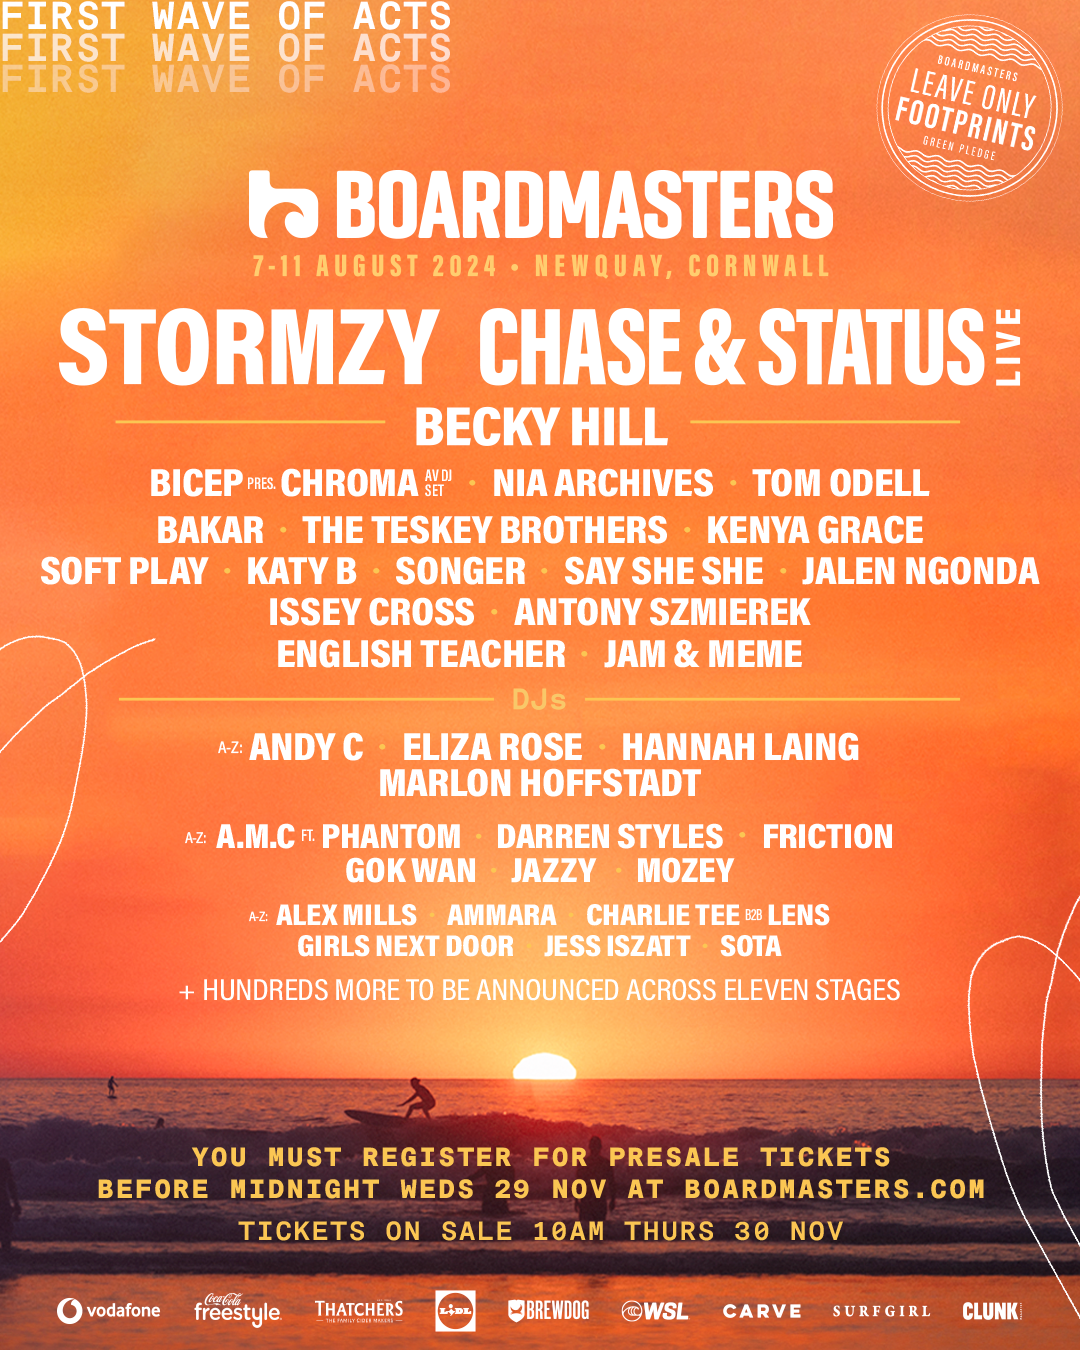 Line up poster for Boardmasters 2024